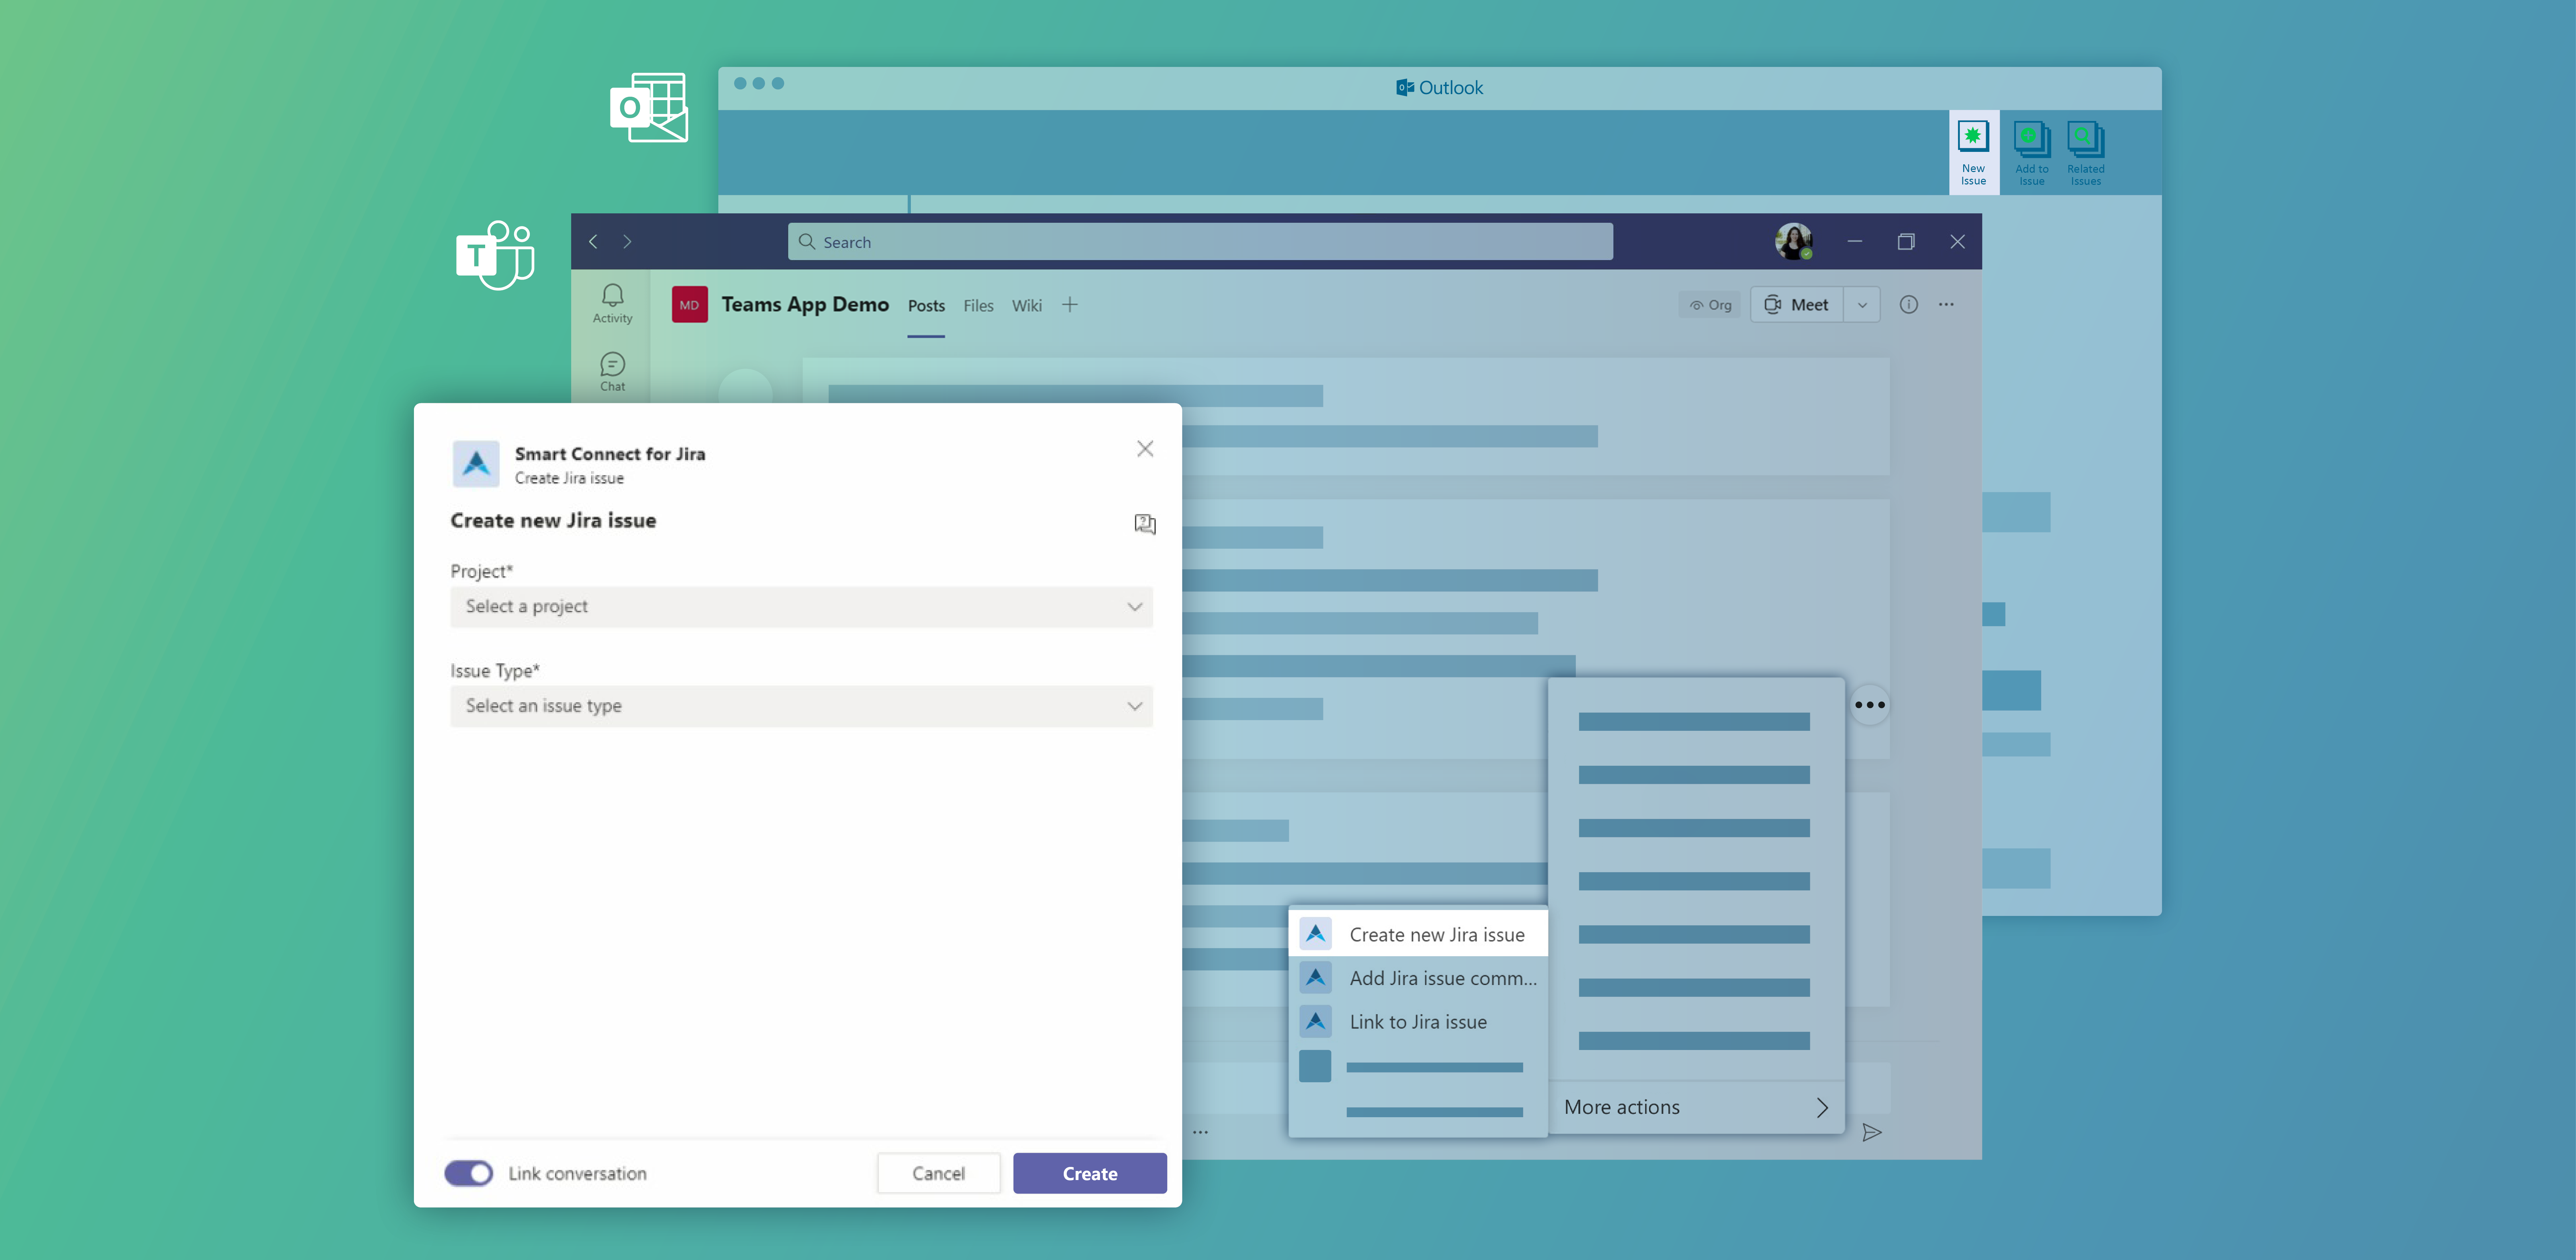 Use Jira features in your Microsoft 365 tools: Access all relevant Jira features with add-ins for Microsoft Outlook and Teams. Create new issues from emails or Microsoft Teams conversations – and access Jira issue information in your Office tools.